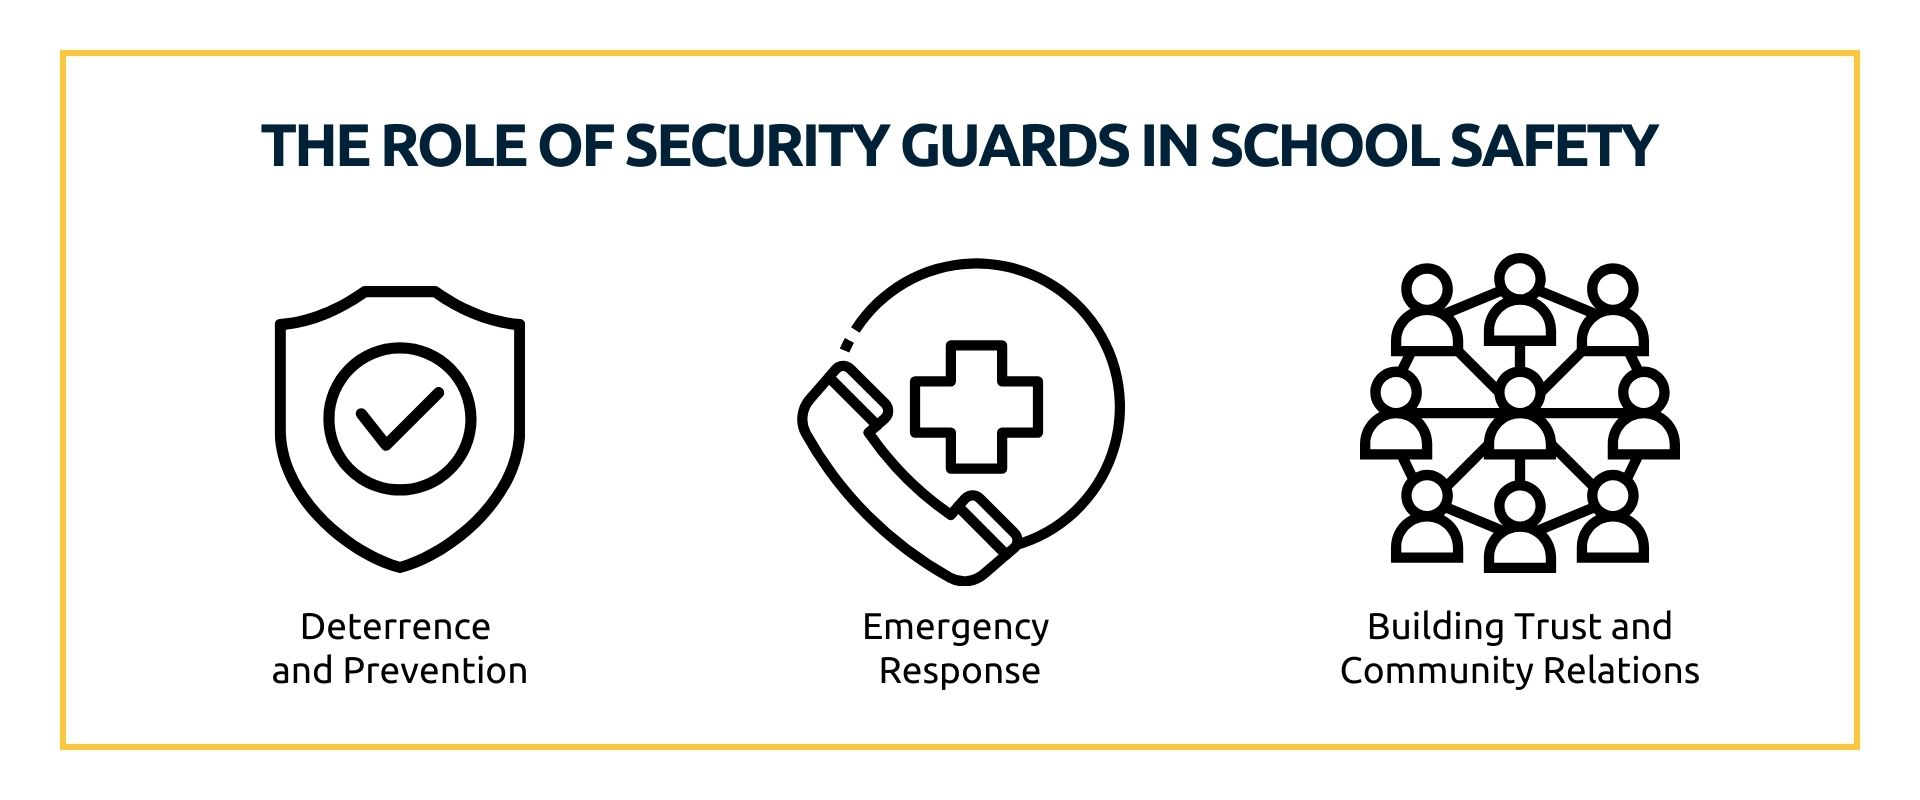 The Role of Security Guards in School Safety